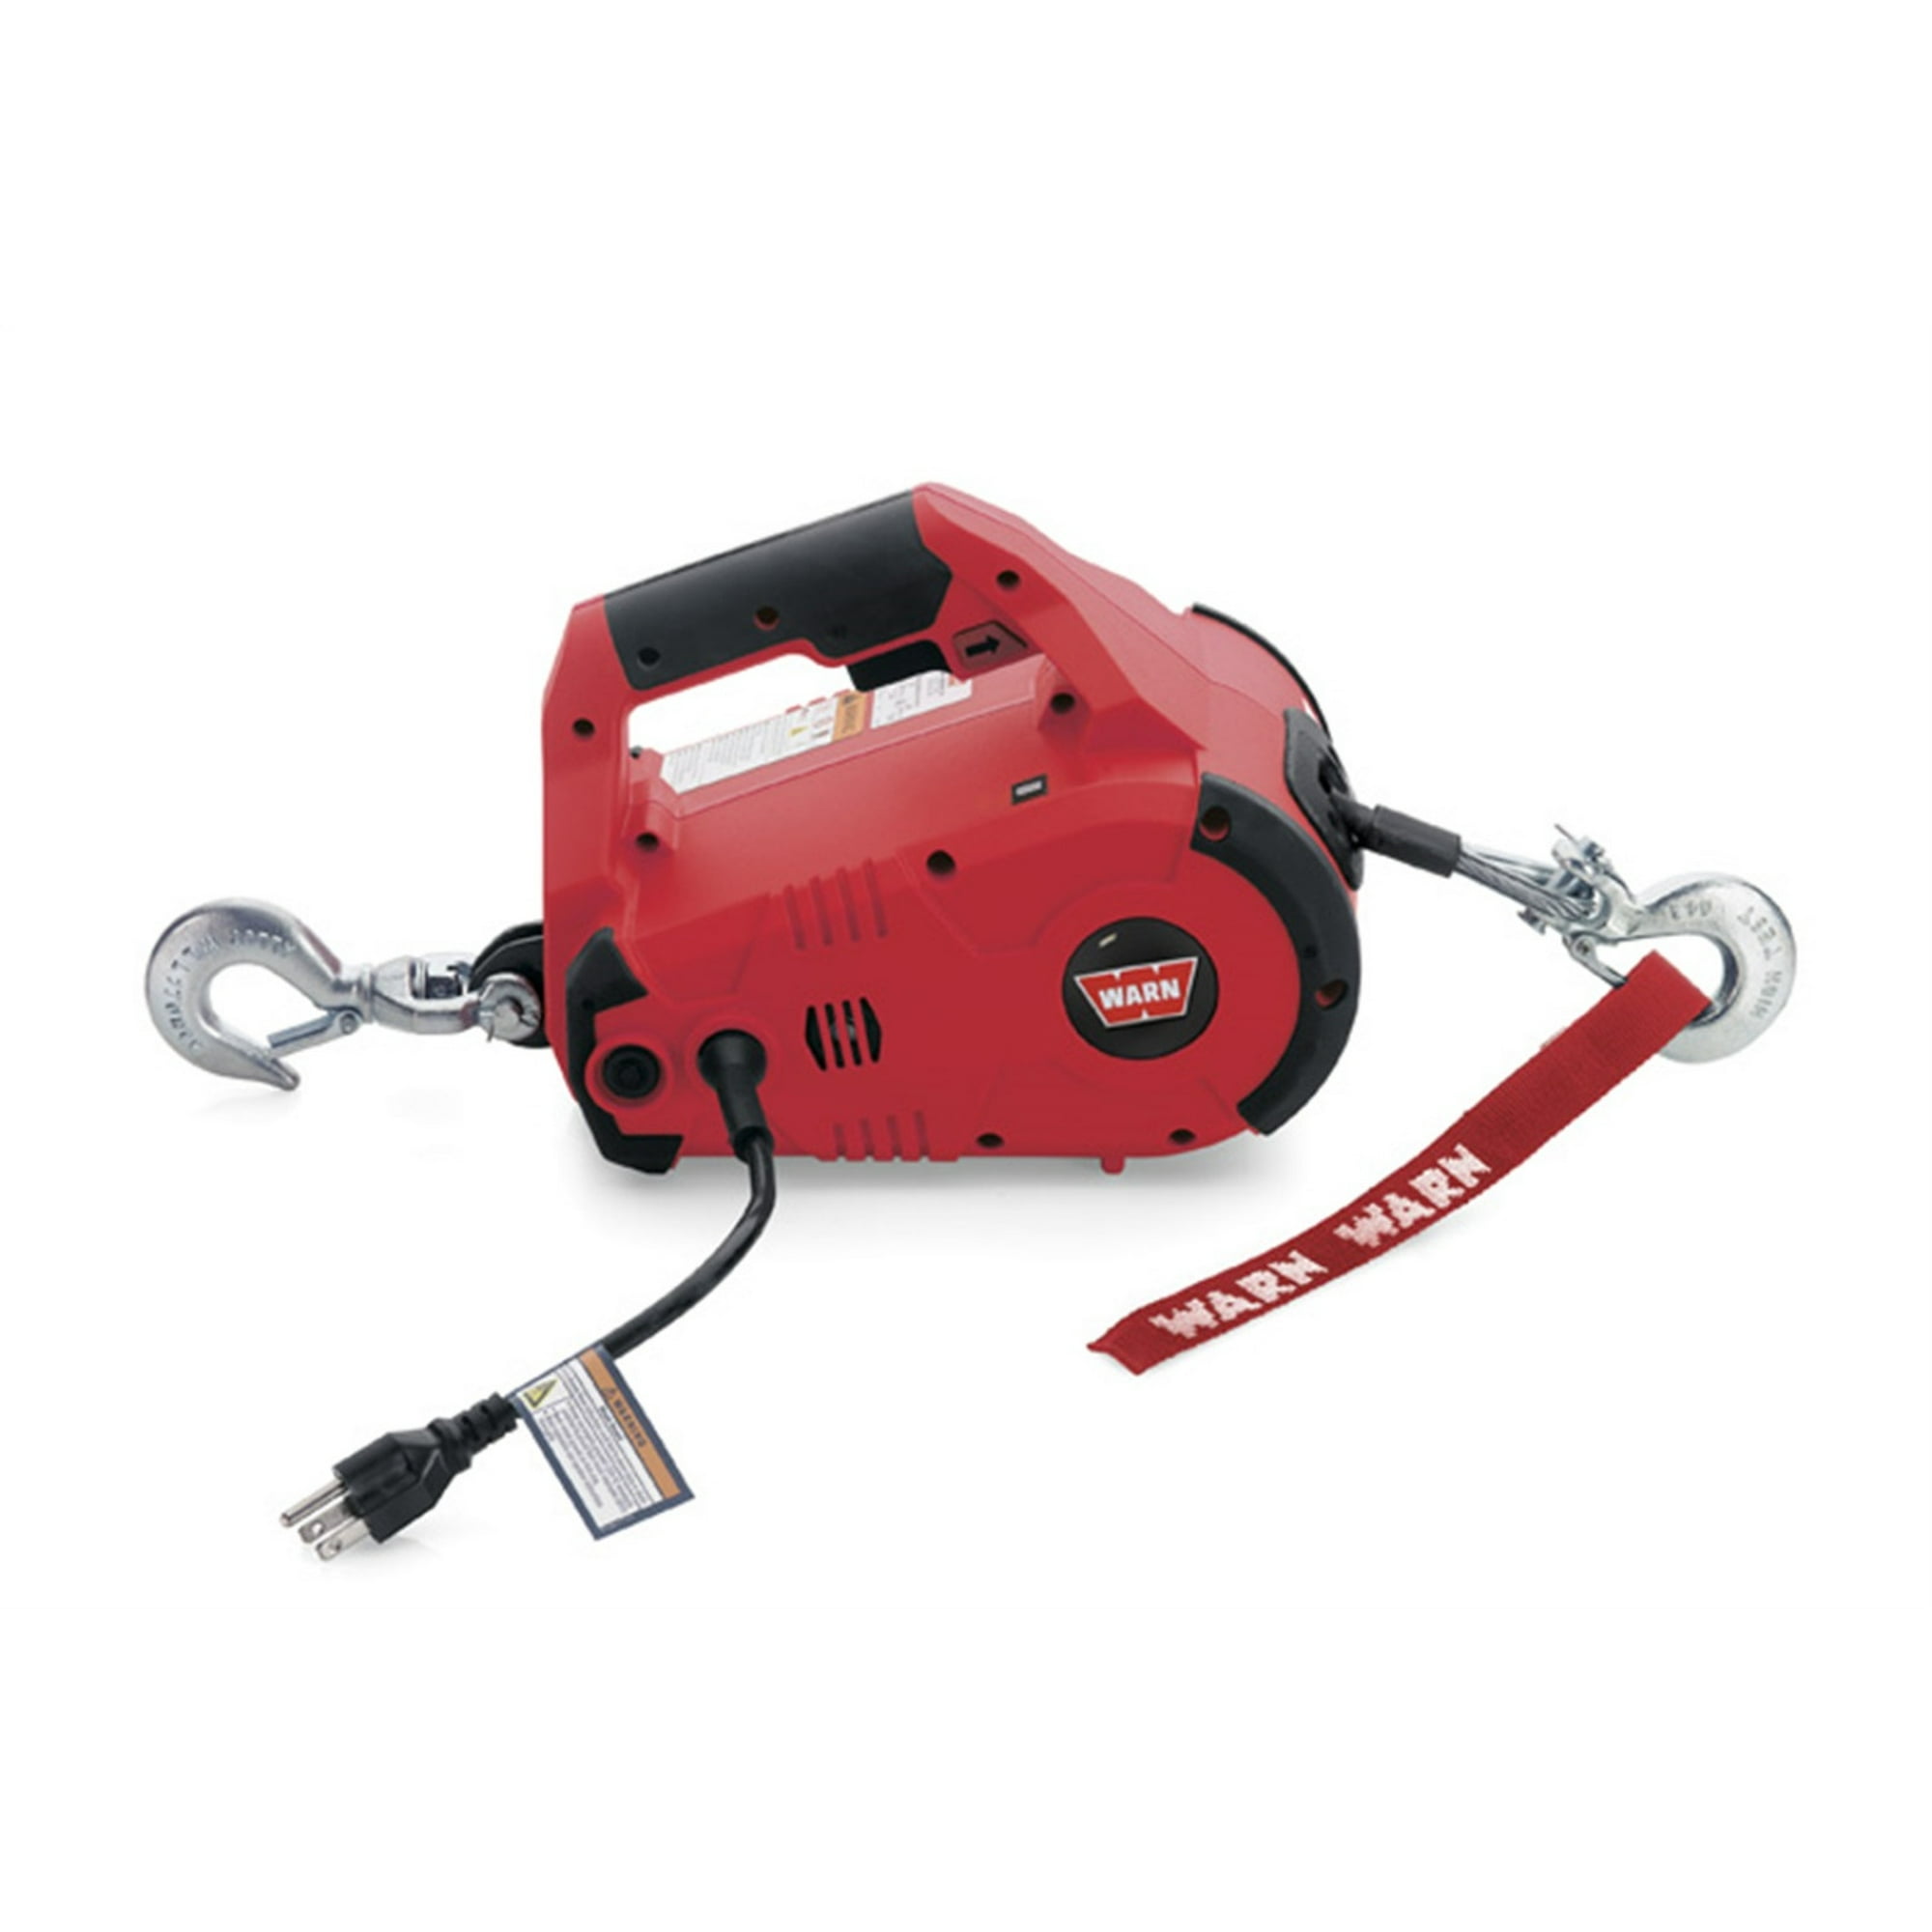 WARN PullzAll Corded 120V AC Portable Electric Winch with Steel Cable